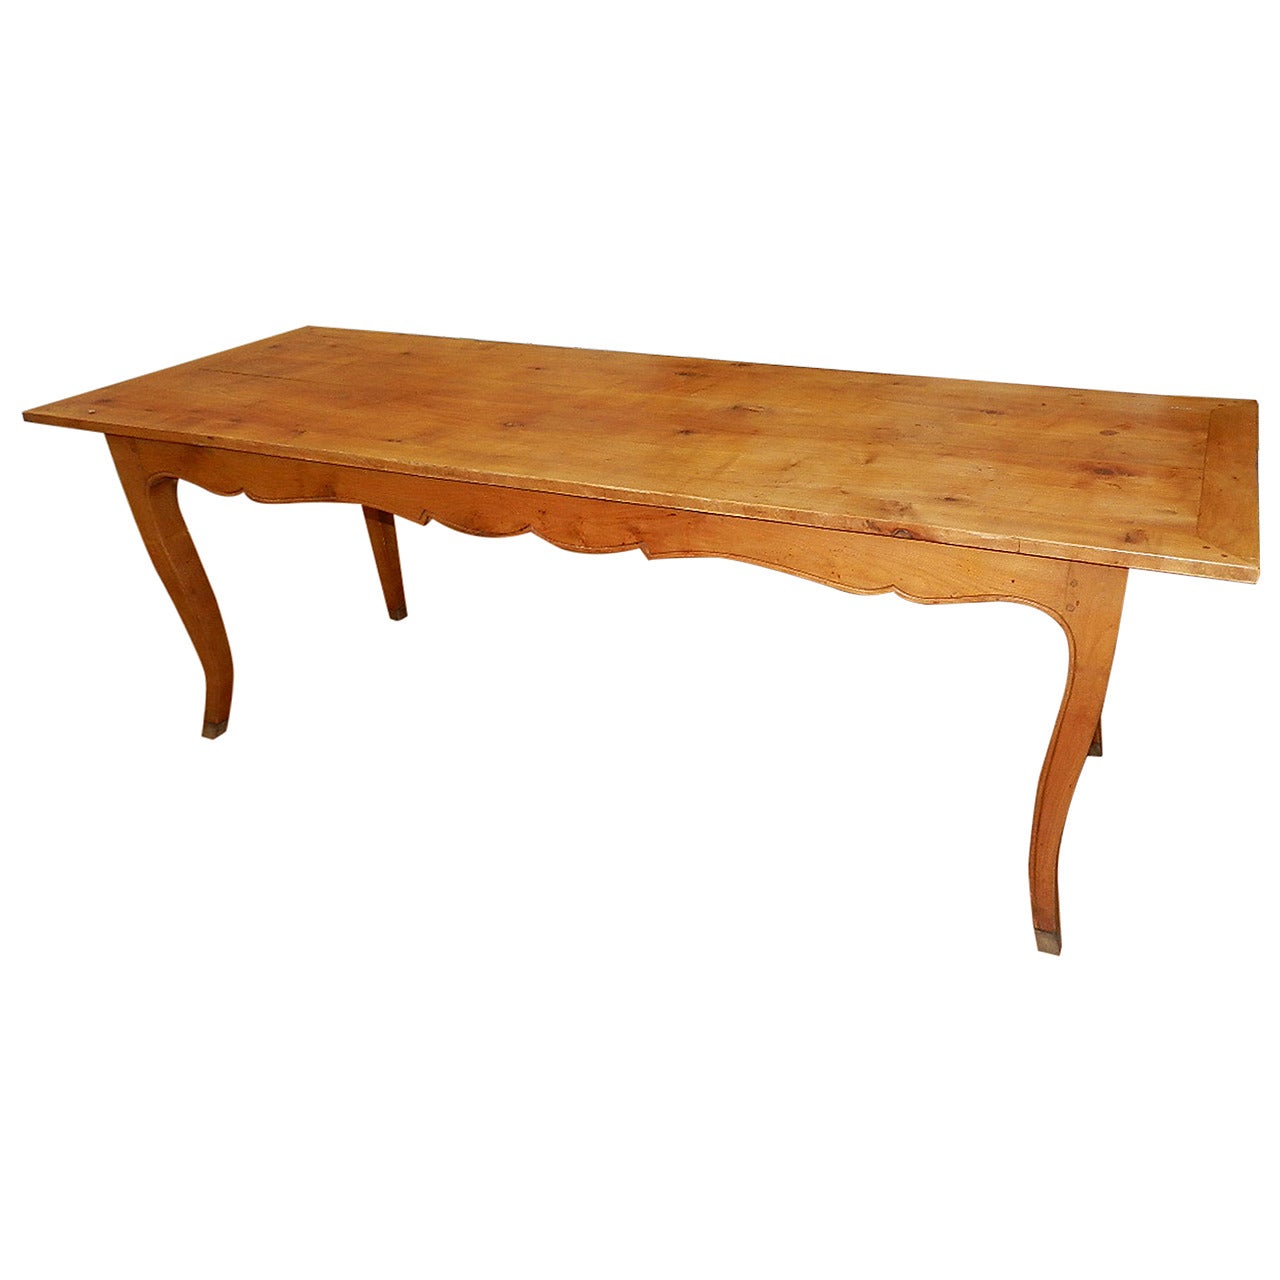 French Cherry Table with Extensions